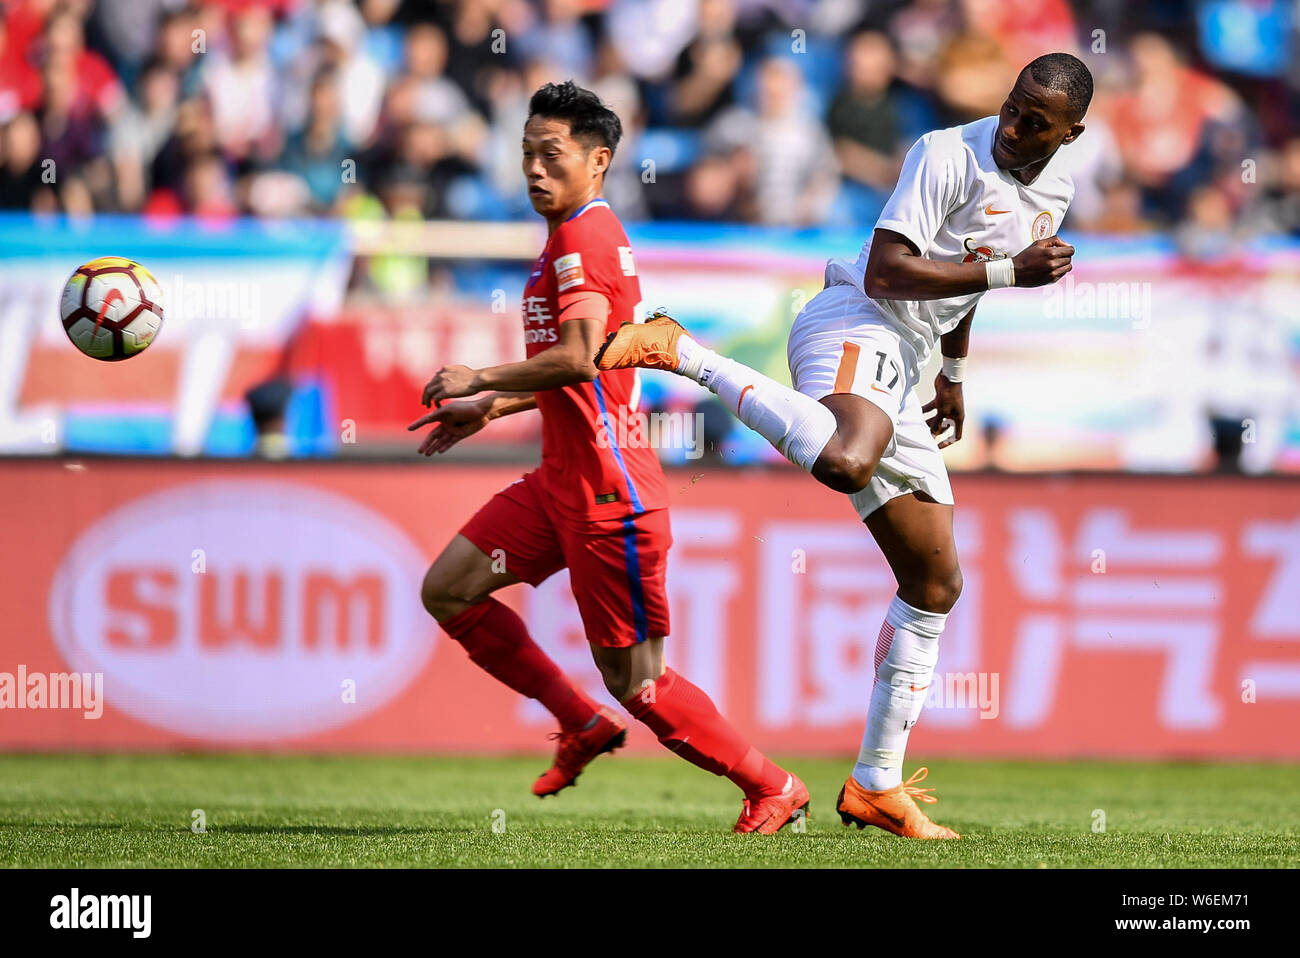 Ecuadorian football player Jaime Ayovi, right, of Beijing Renhe kicks the ball to make a pass against a player of Chongqing SWM in their first round m Stock Photo